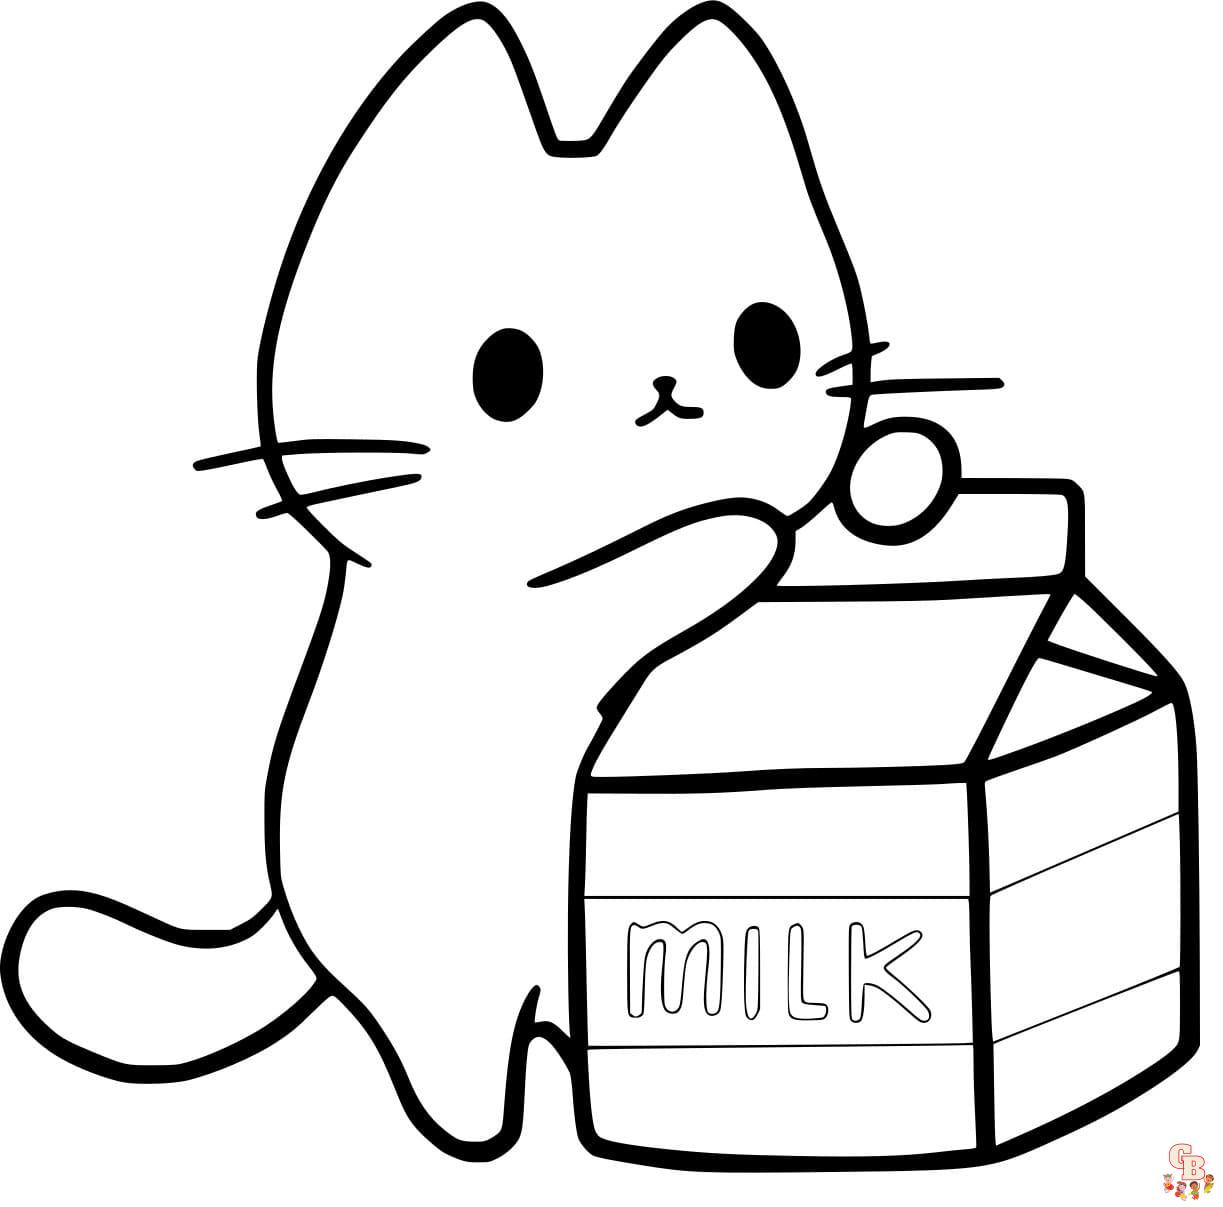 Milk coloring pages printable free